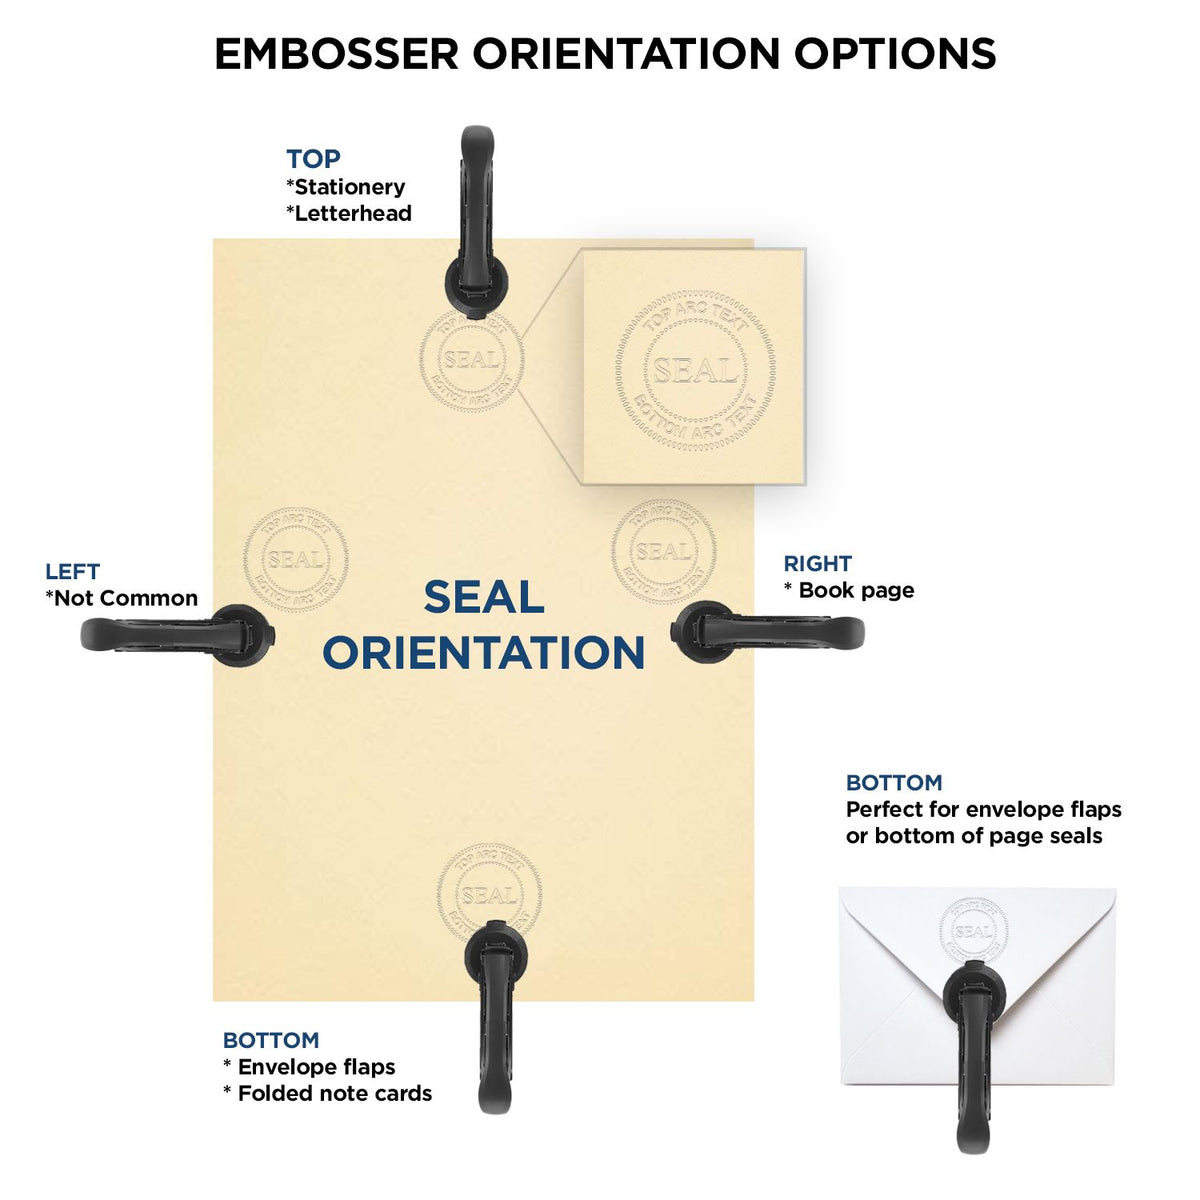 An infographic for the Handheld Arkansas Land Surveyor Seal showing embosser orientation, this is showing examples of a top, bottom, right and left insert.